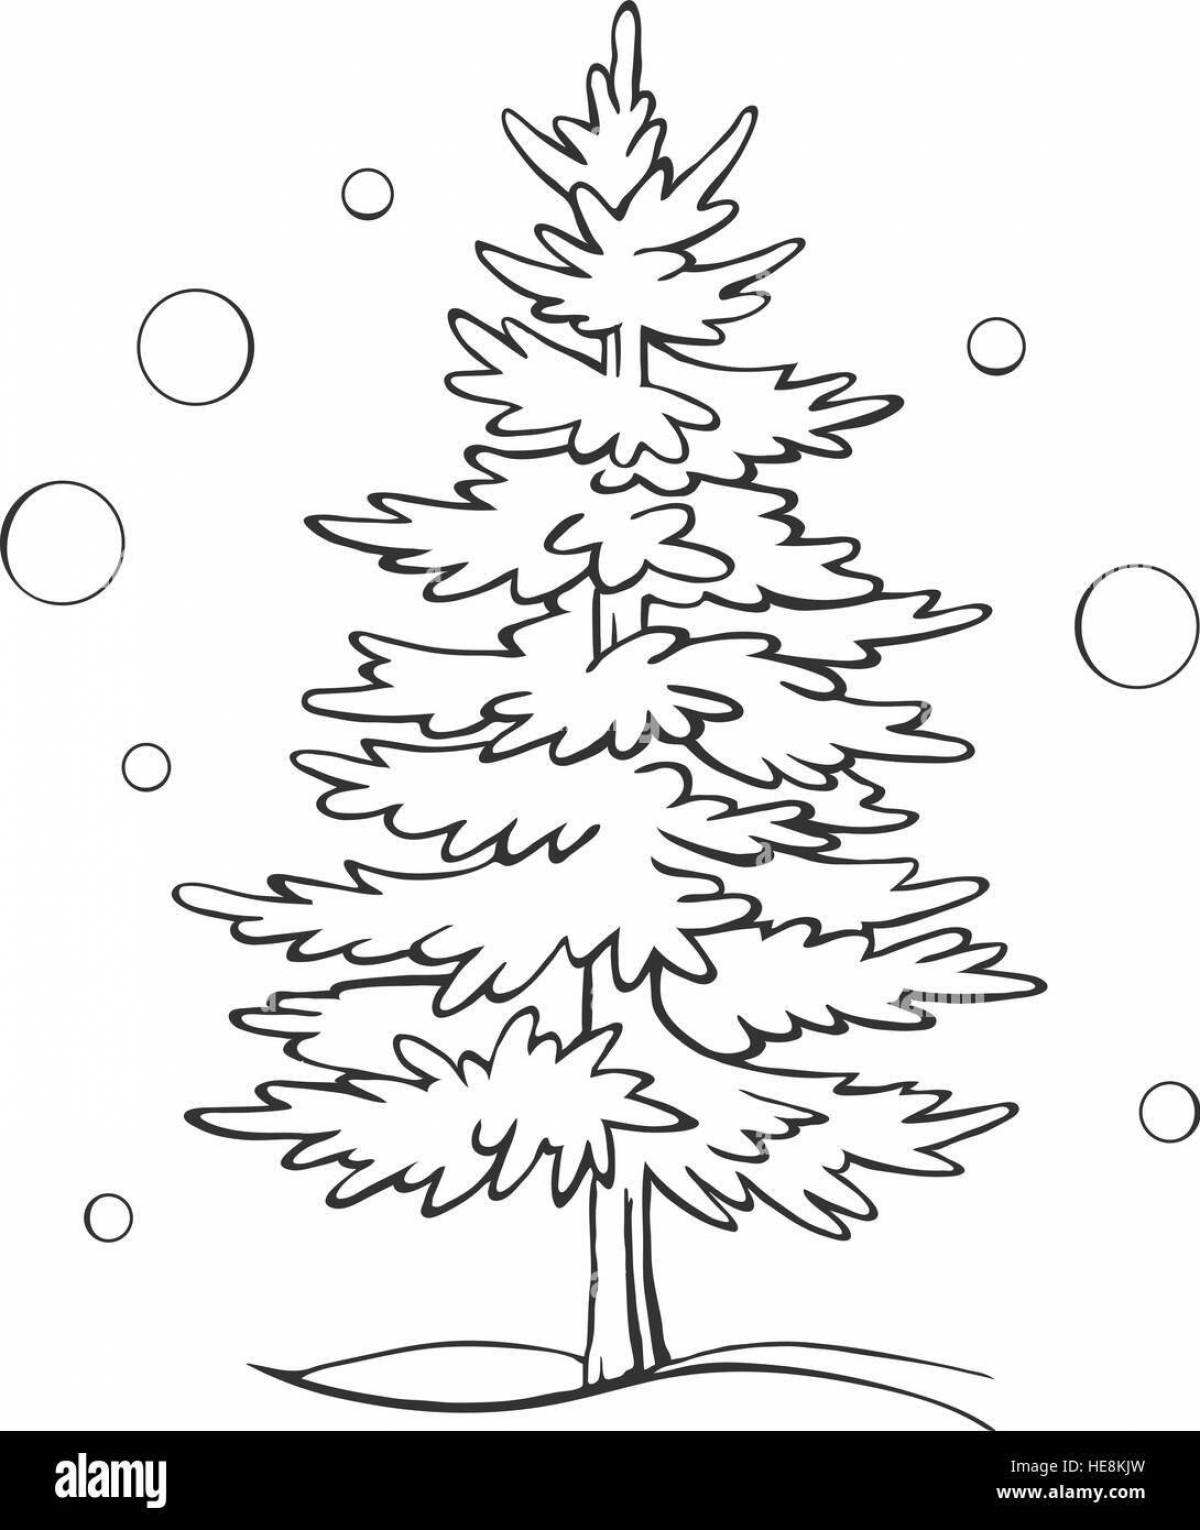 Awesome tree on the snow coloring page